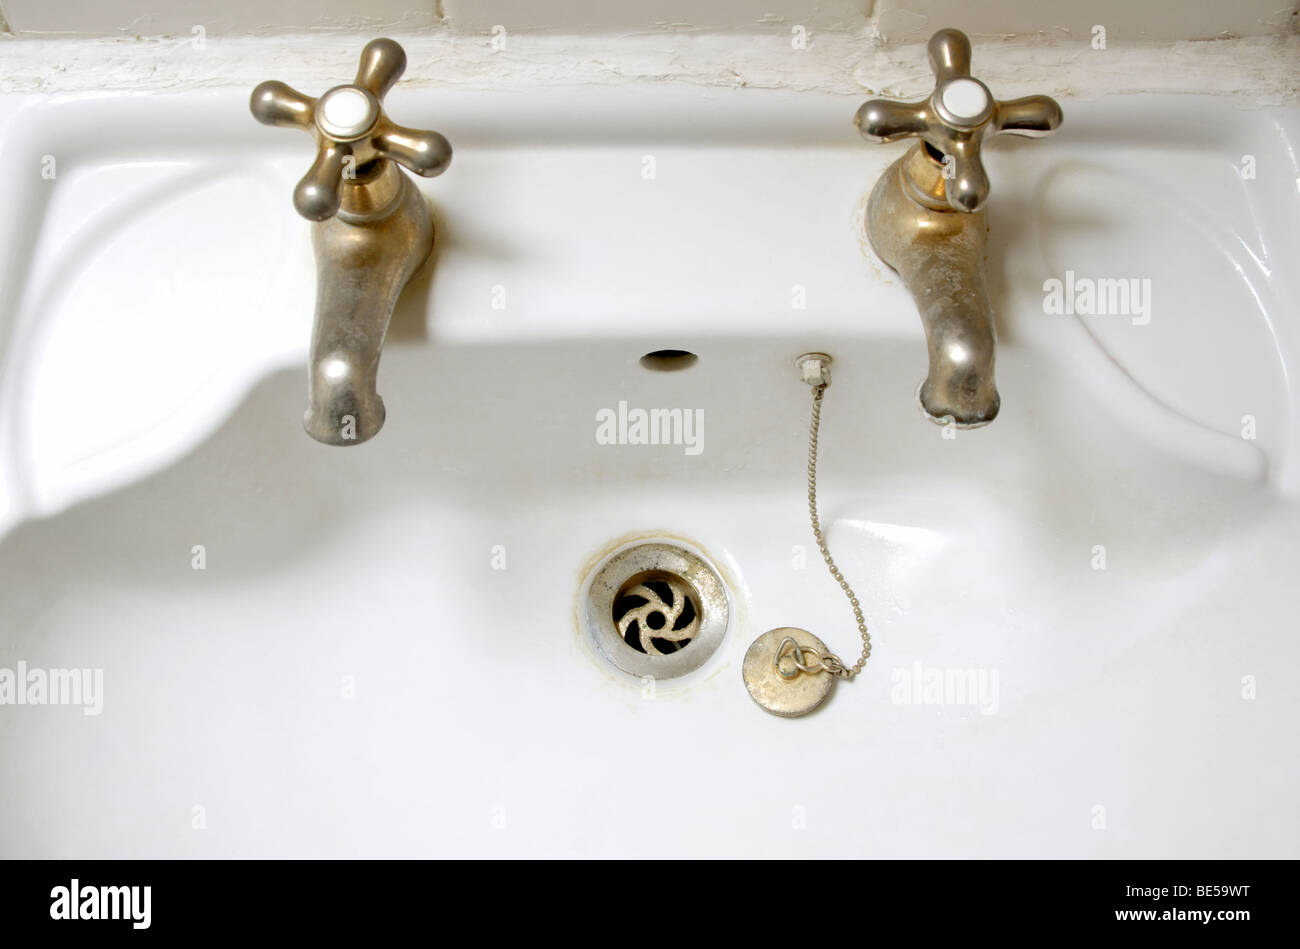 Empty bathroom sink with taps and plug Stock Photo